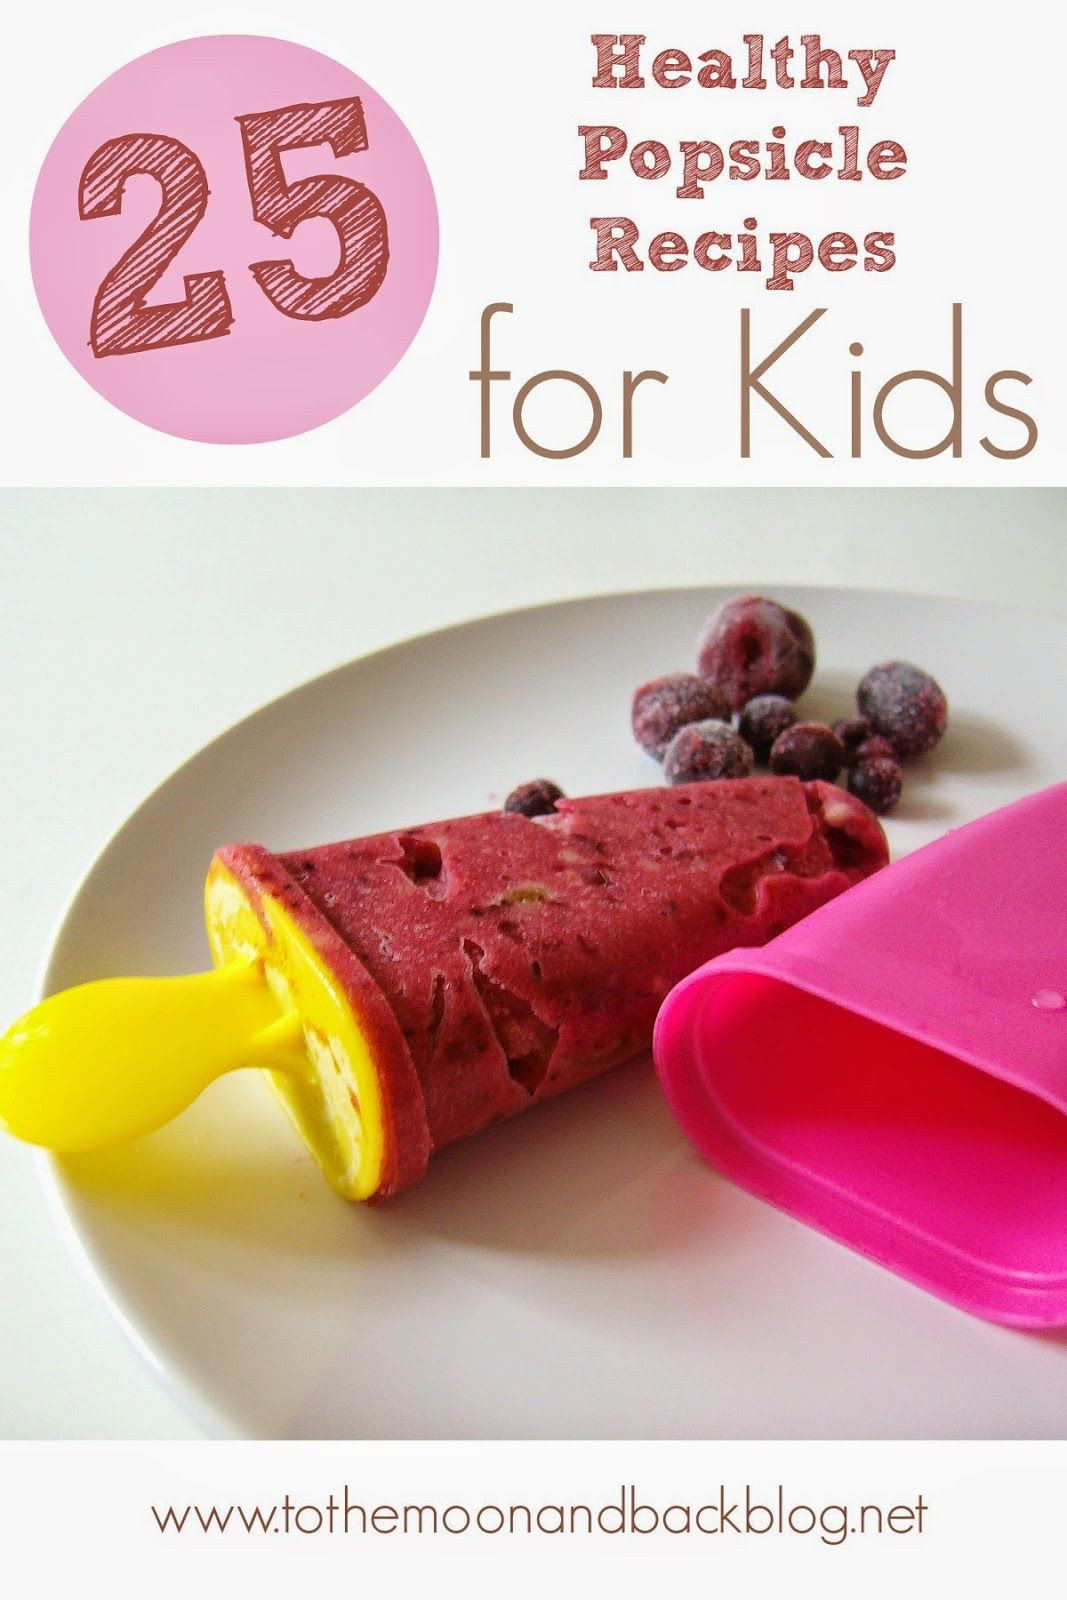 Popsicles Recipes For Kids
 25 Healthy Popsicle Recipes for Kids